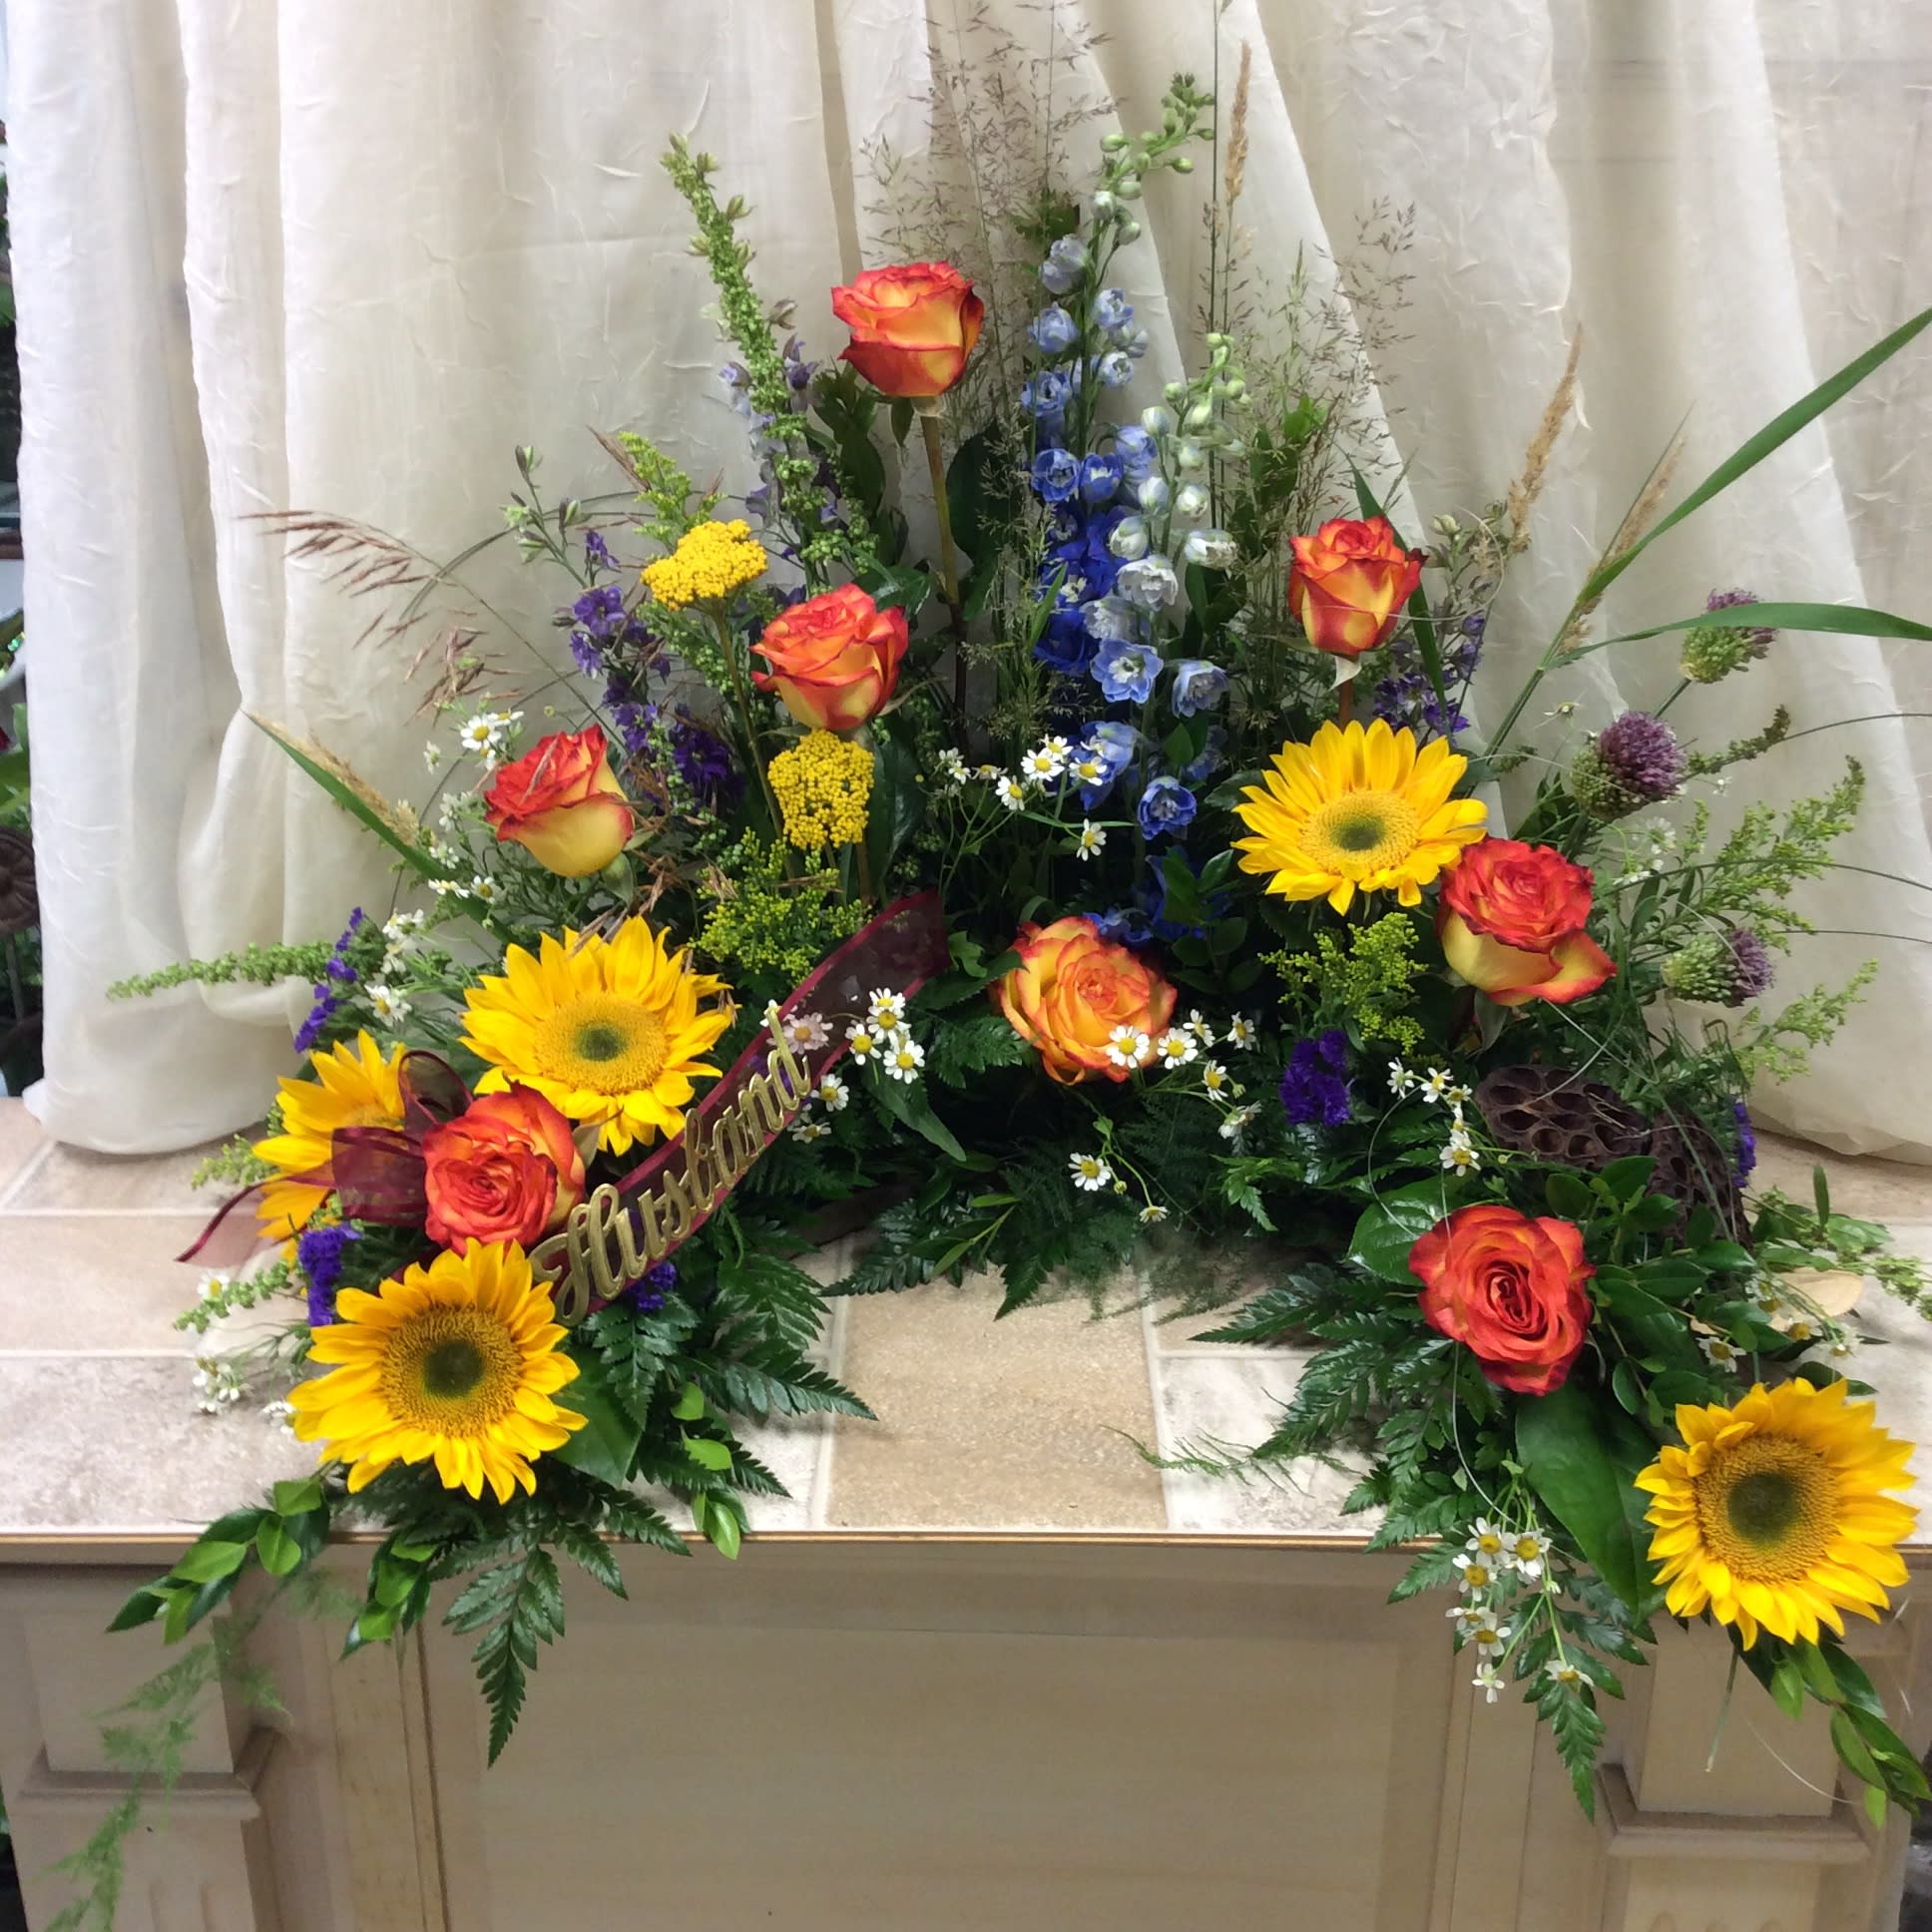 Sterling - Half urn wreath filled with a lovely mix of sunflowers, blue delphinium, roses, yarrow, lotus pods, statice, and larkspur. 